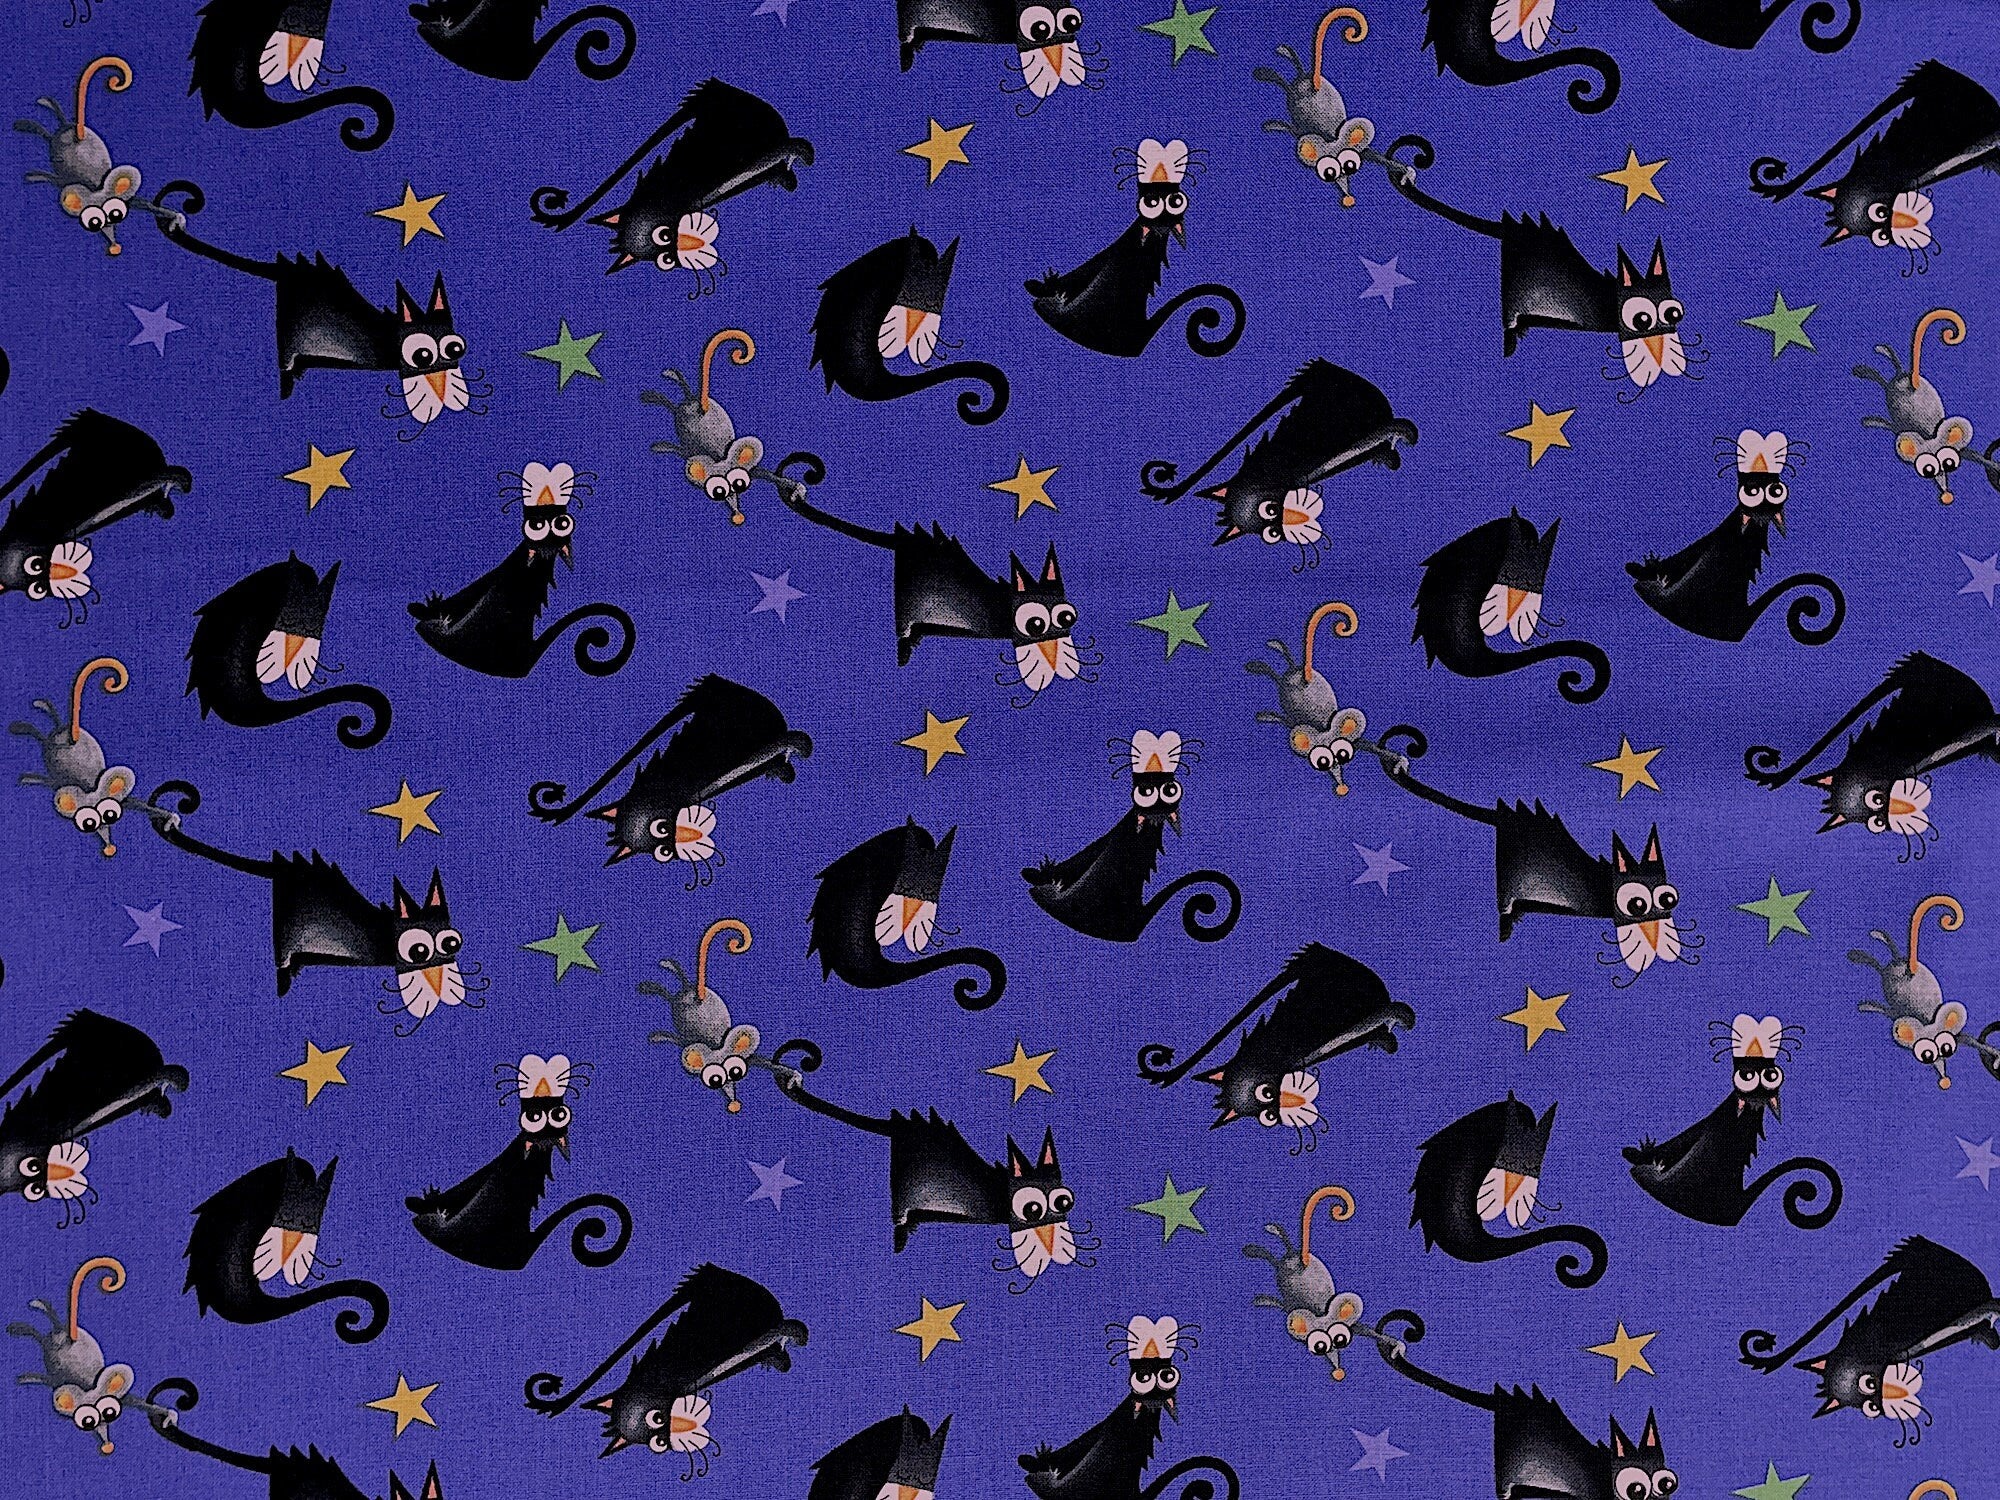 This fabric is called Boo with Glow and is covered with black cats, stars and mice. This fabric glows in the dark.